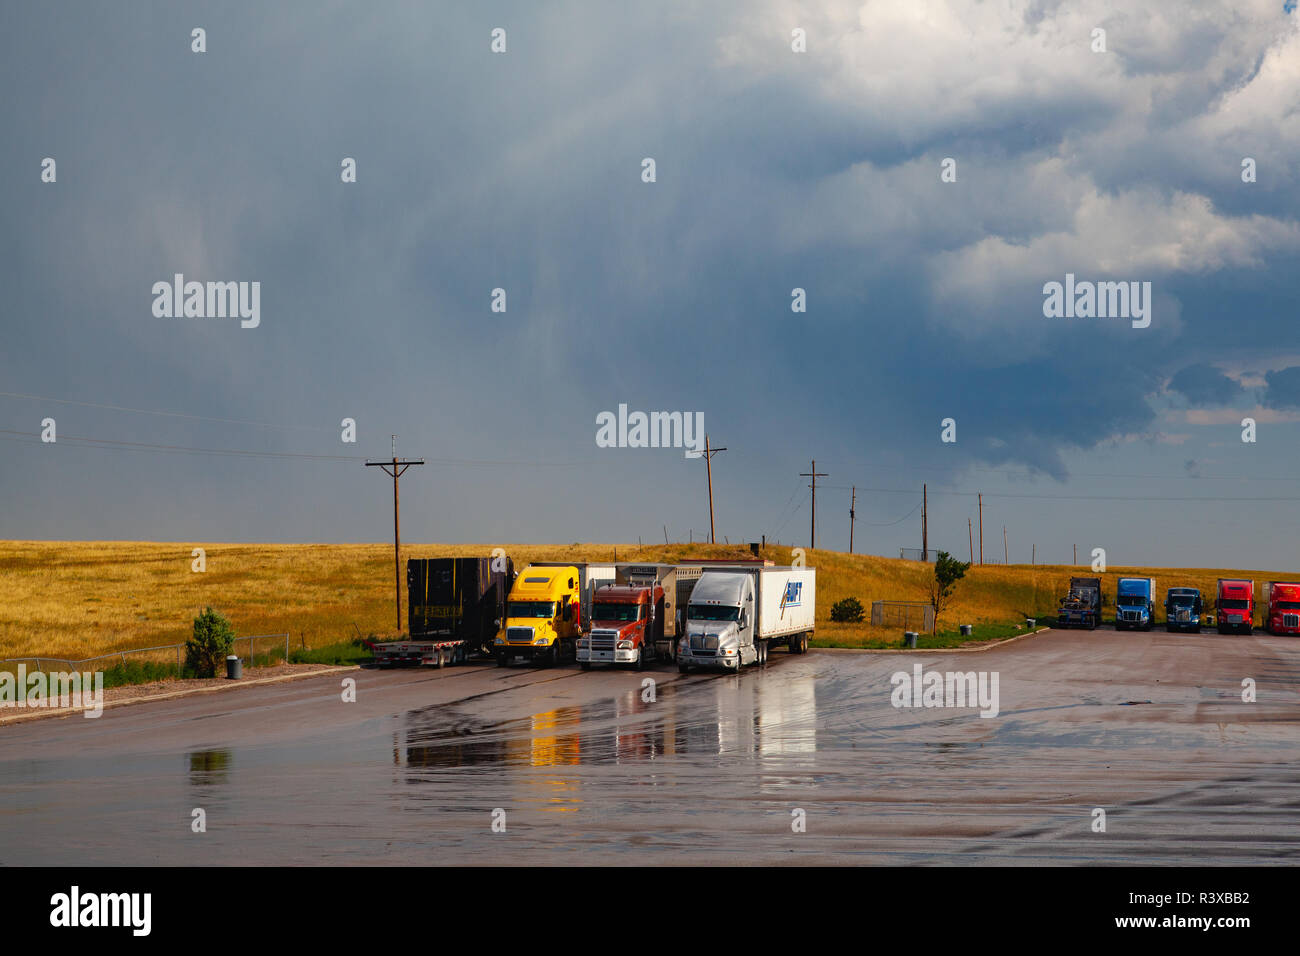 Denver,USA - July 18,2013: Parking place in Love's gas station after heavy storm.Love's provides professional truck drivers and motorists with 24-hour Stock Photo